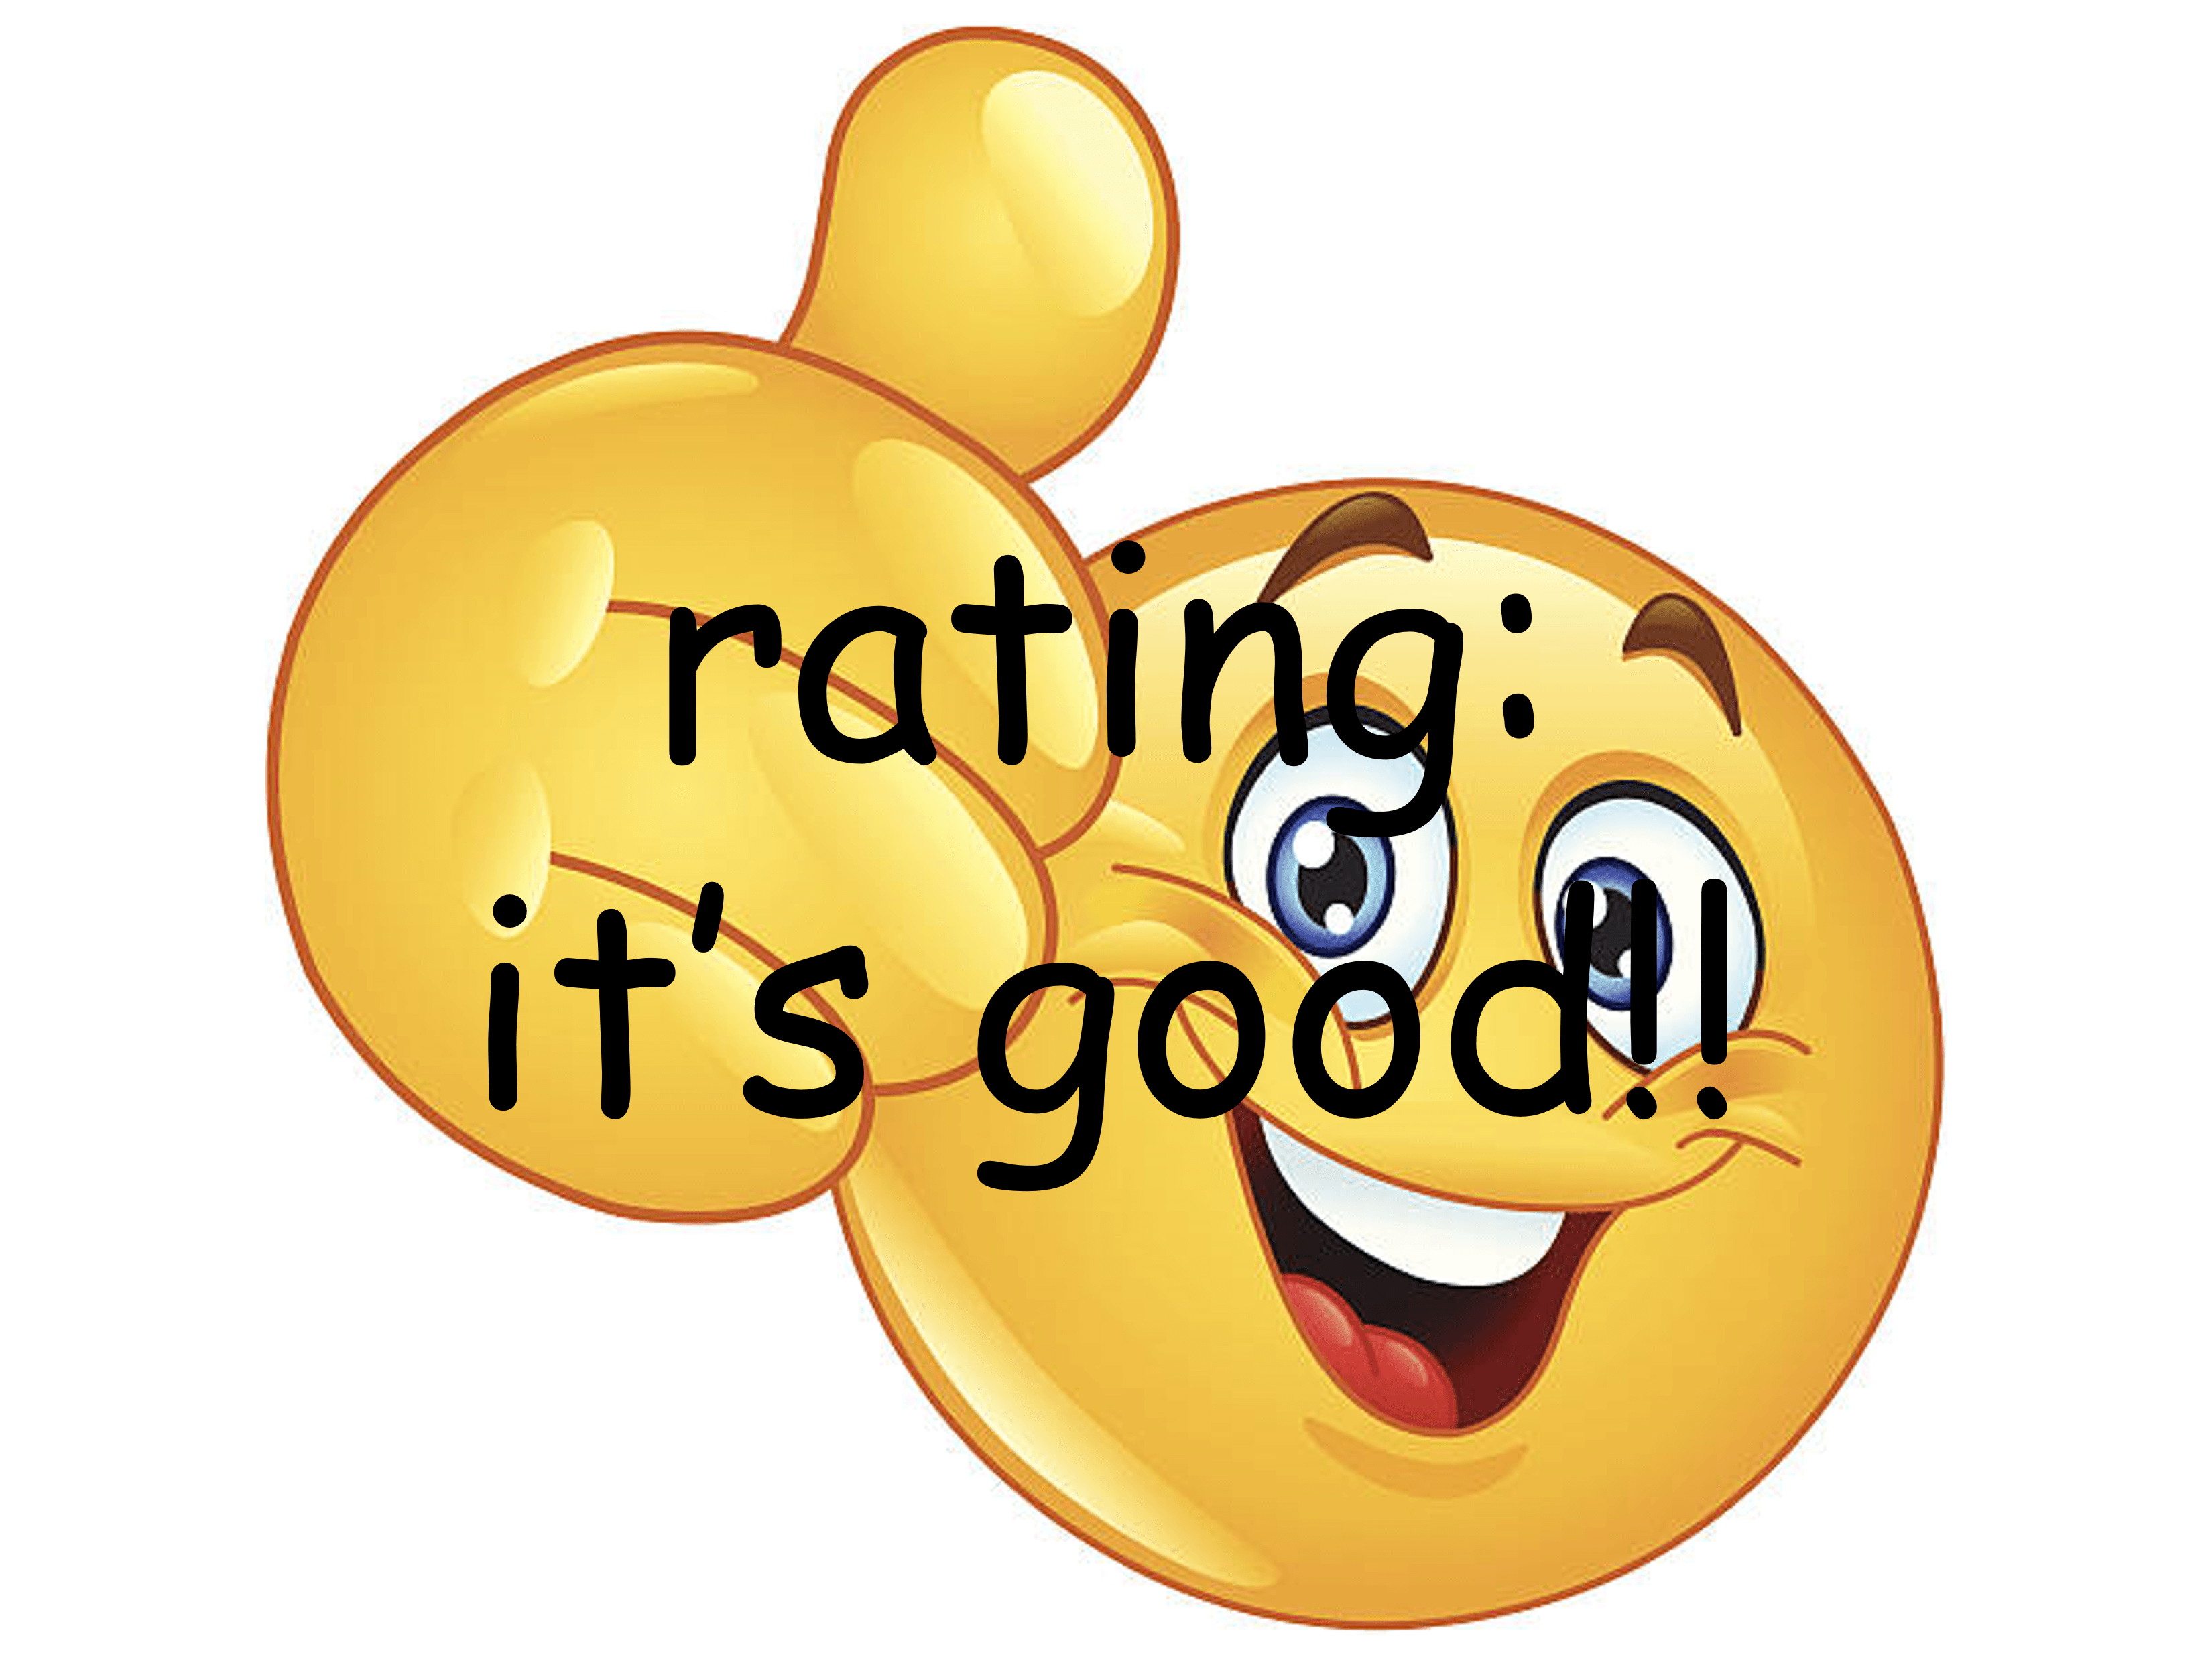 A picture of a happy looking yellow emoji giving a thumbs up. There is black text over the emoji that says: Rating: It's good!!